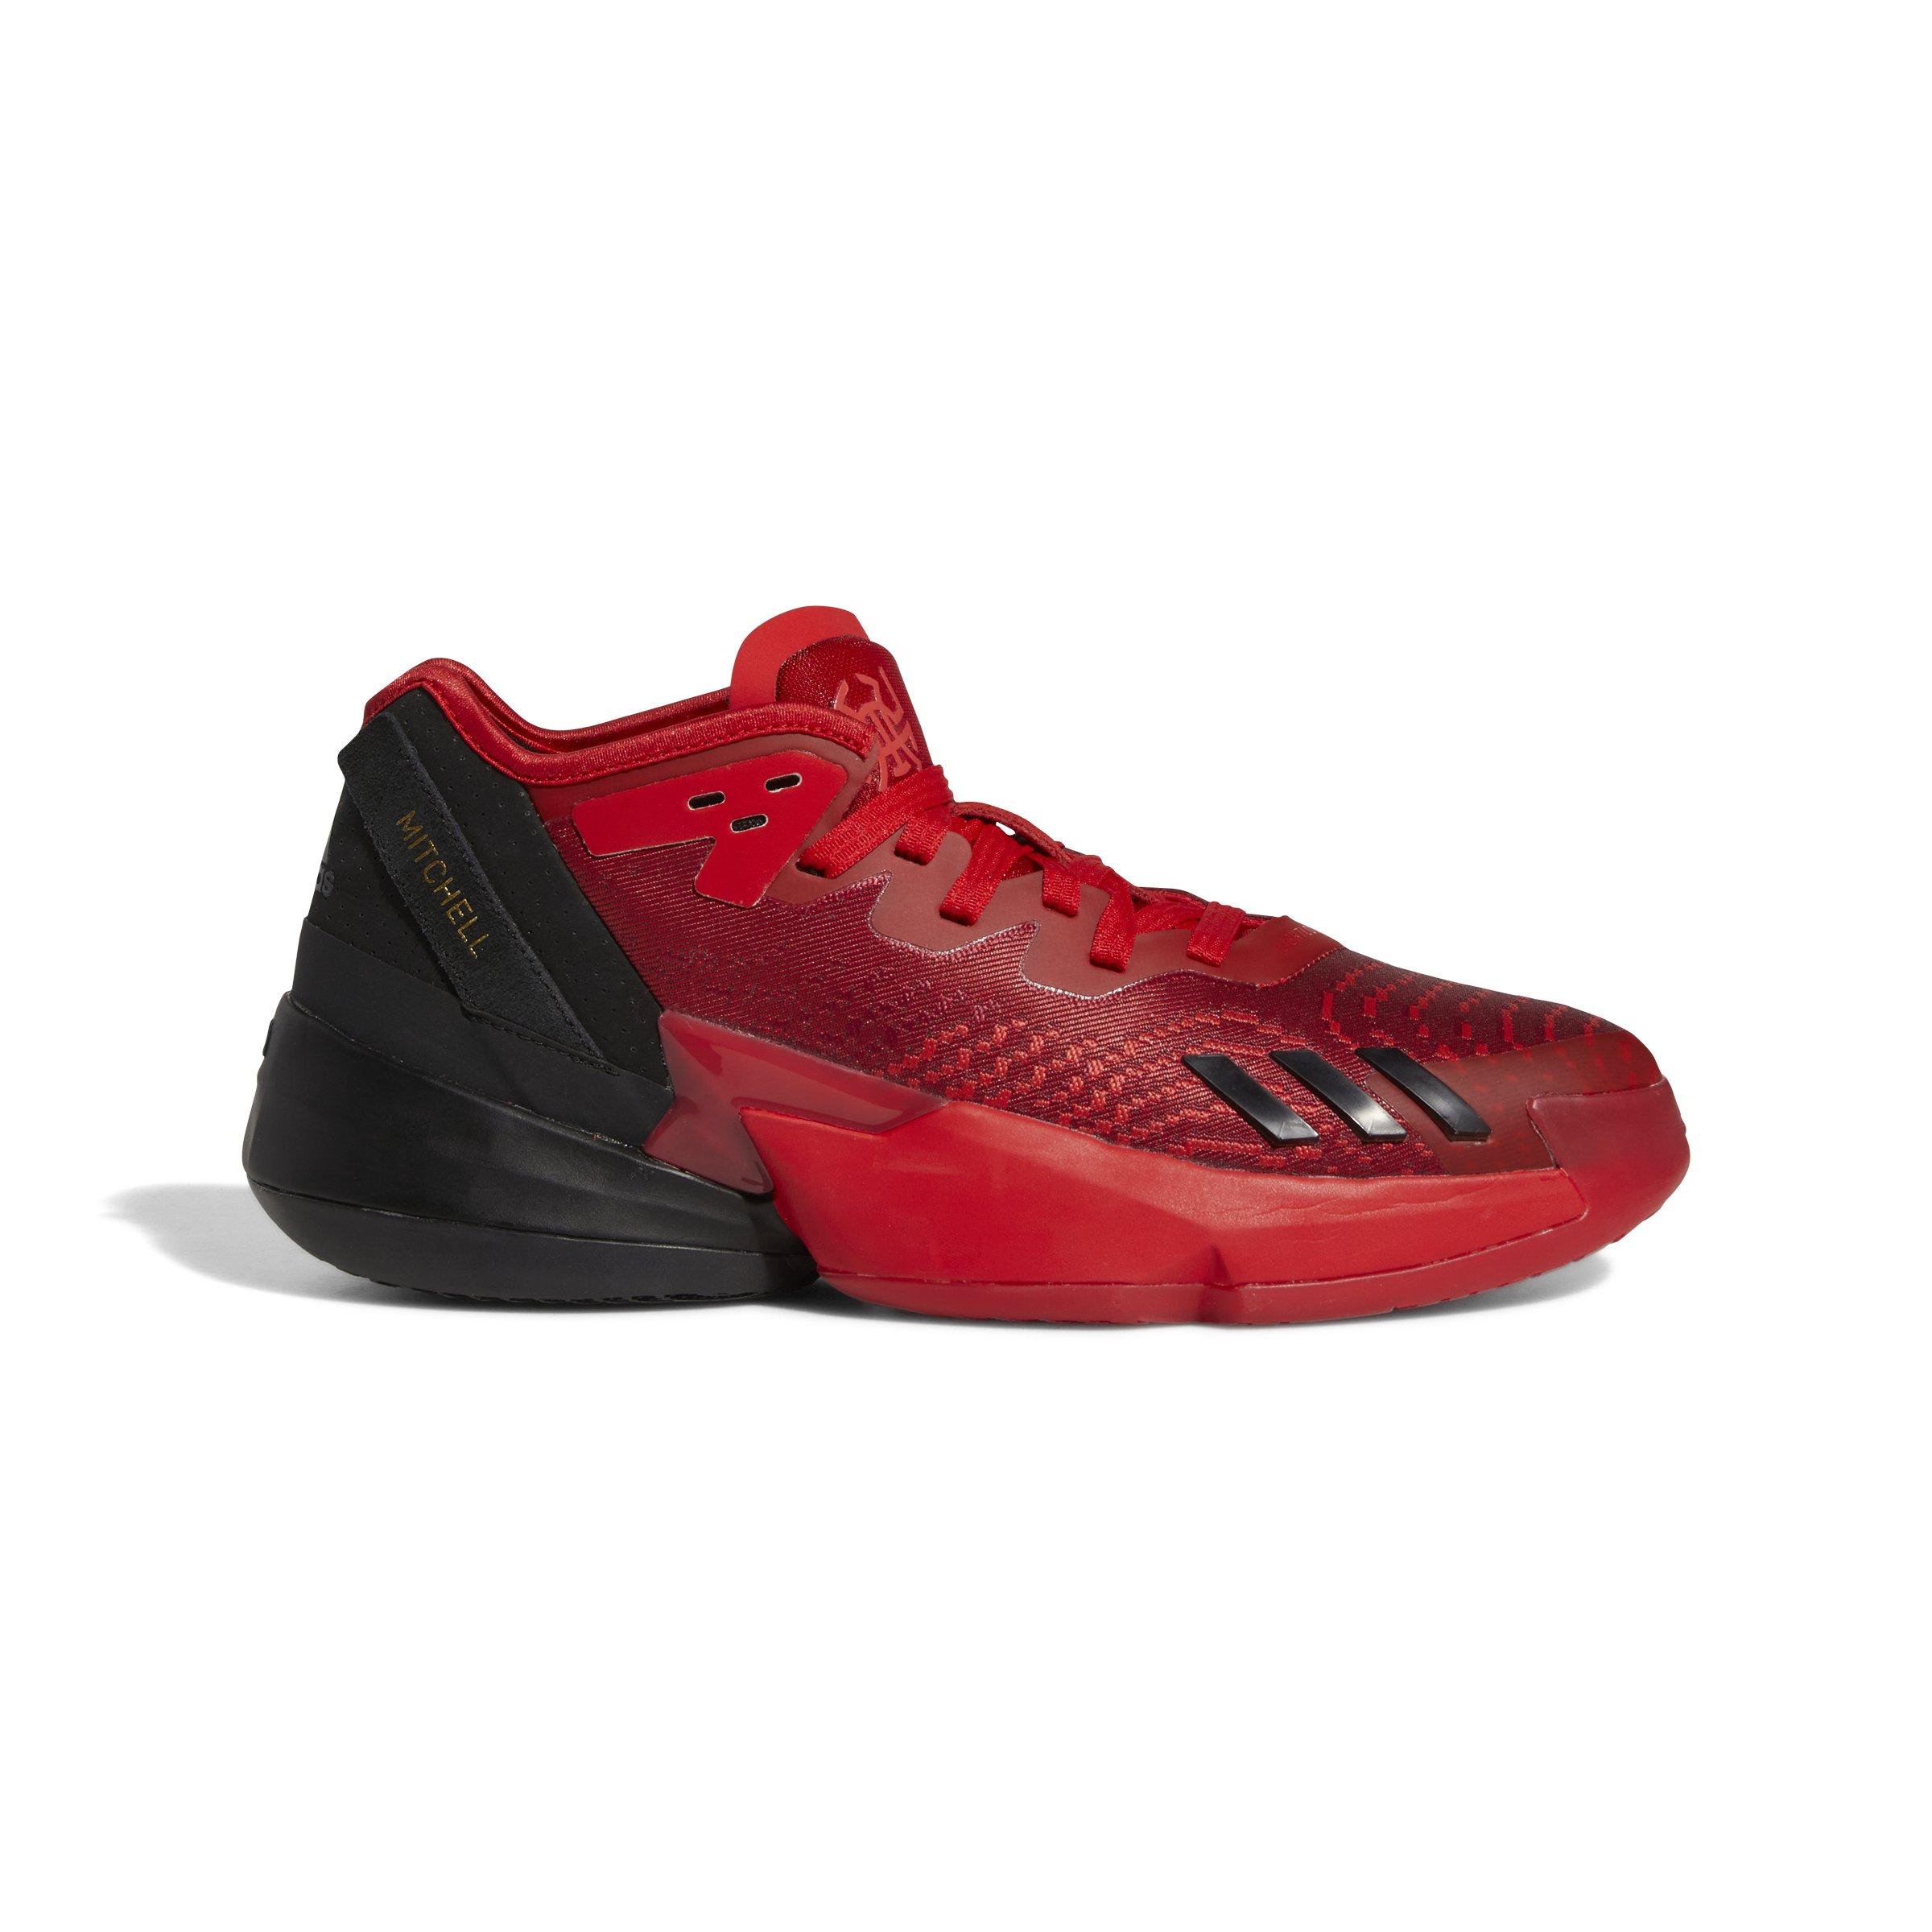 adidas red black basketball shoes